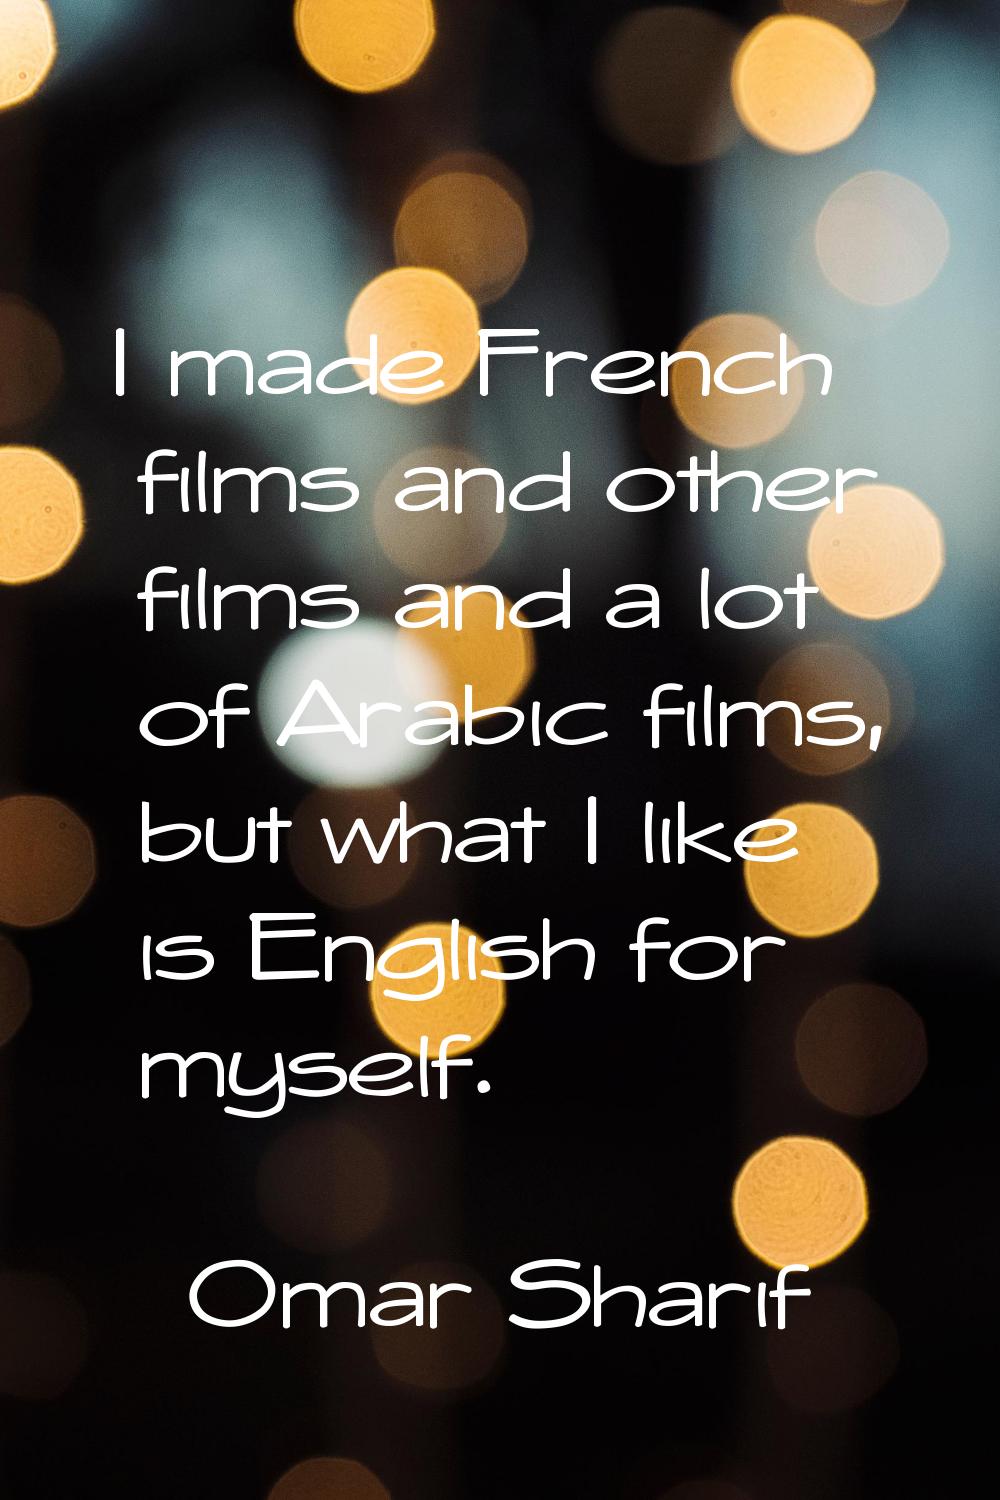 I made French films and other films and a lot of Arabic films, but what I like is English for mysel